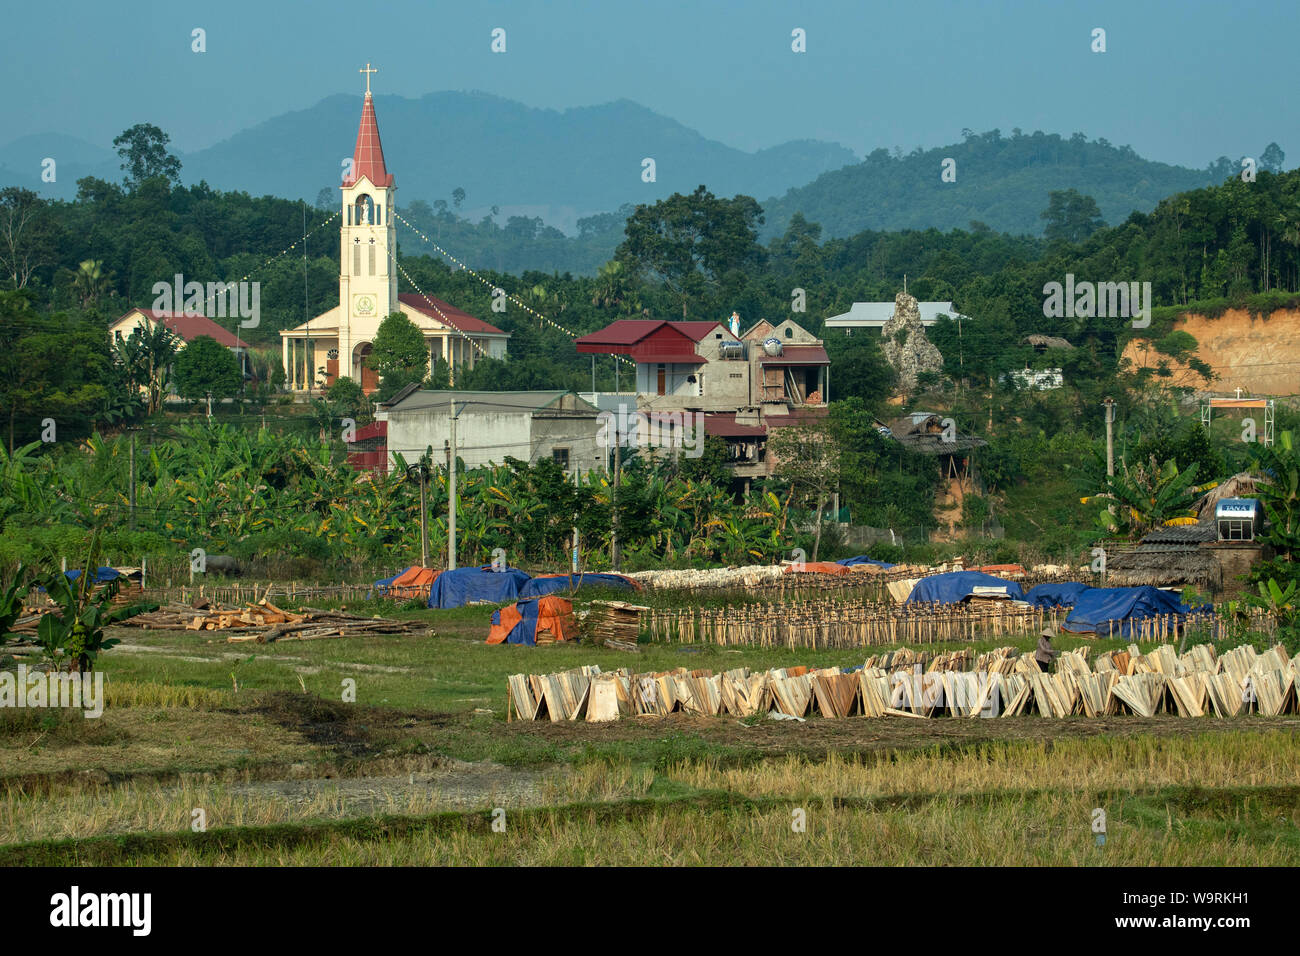 Asia, Asien, SE Asia, Vietnam, Northern, catholic church in countryside *** Local Caption *** Stock Photo